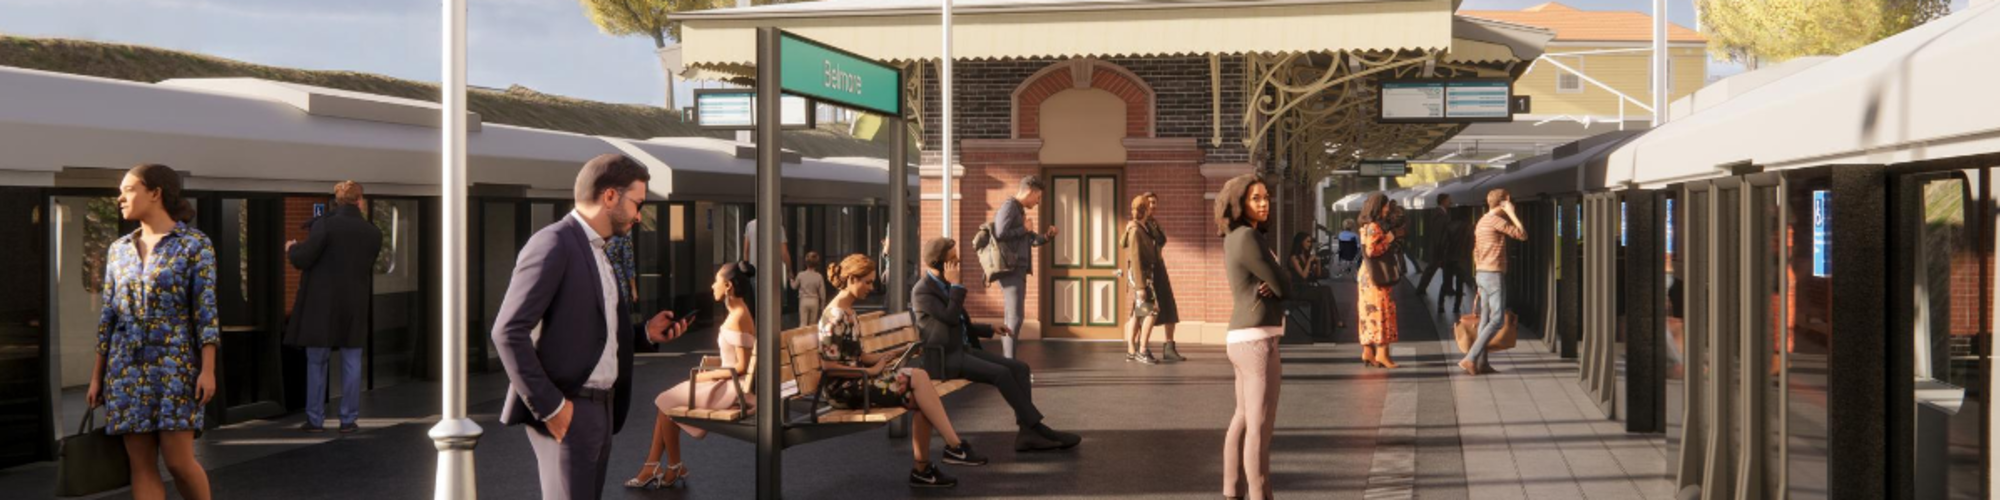 An artist's impression of the future metro station at Belmore as viewed from the platform, being delivered as part of the Sydney Metro City & Southwest project.